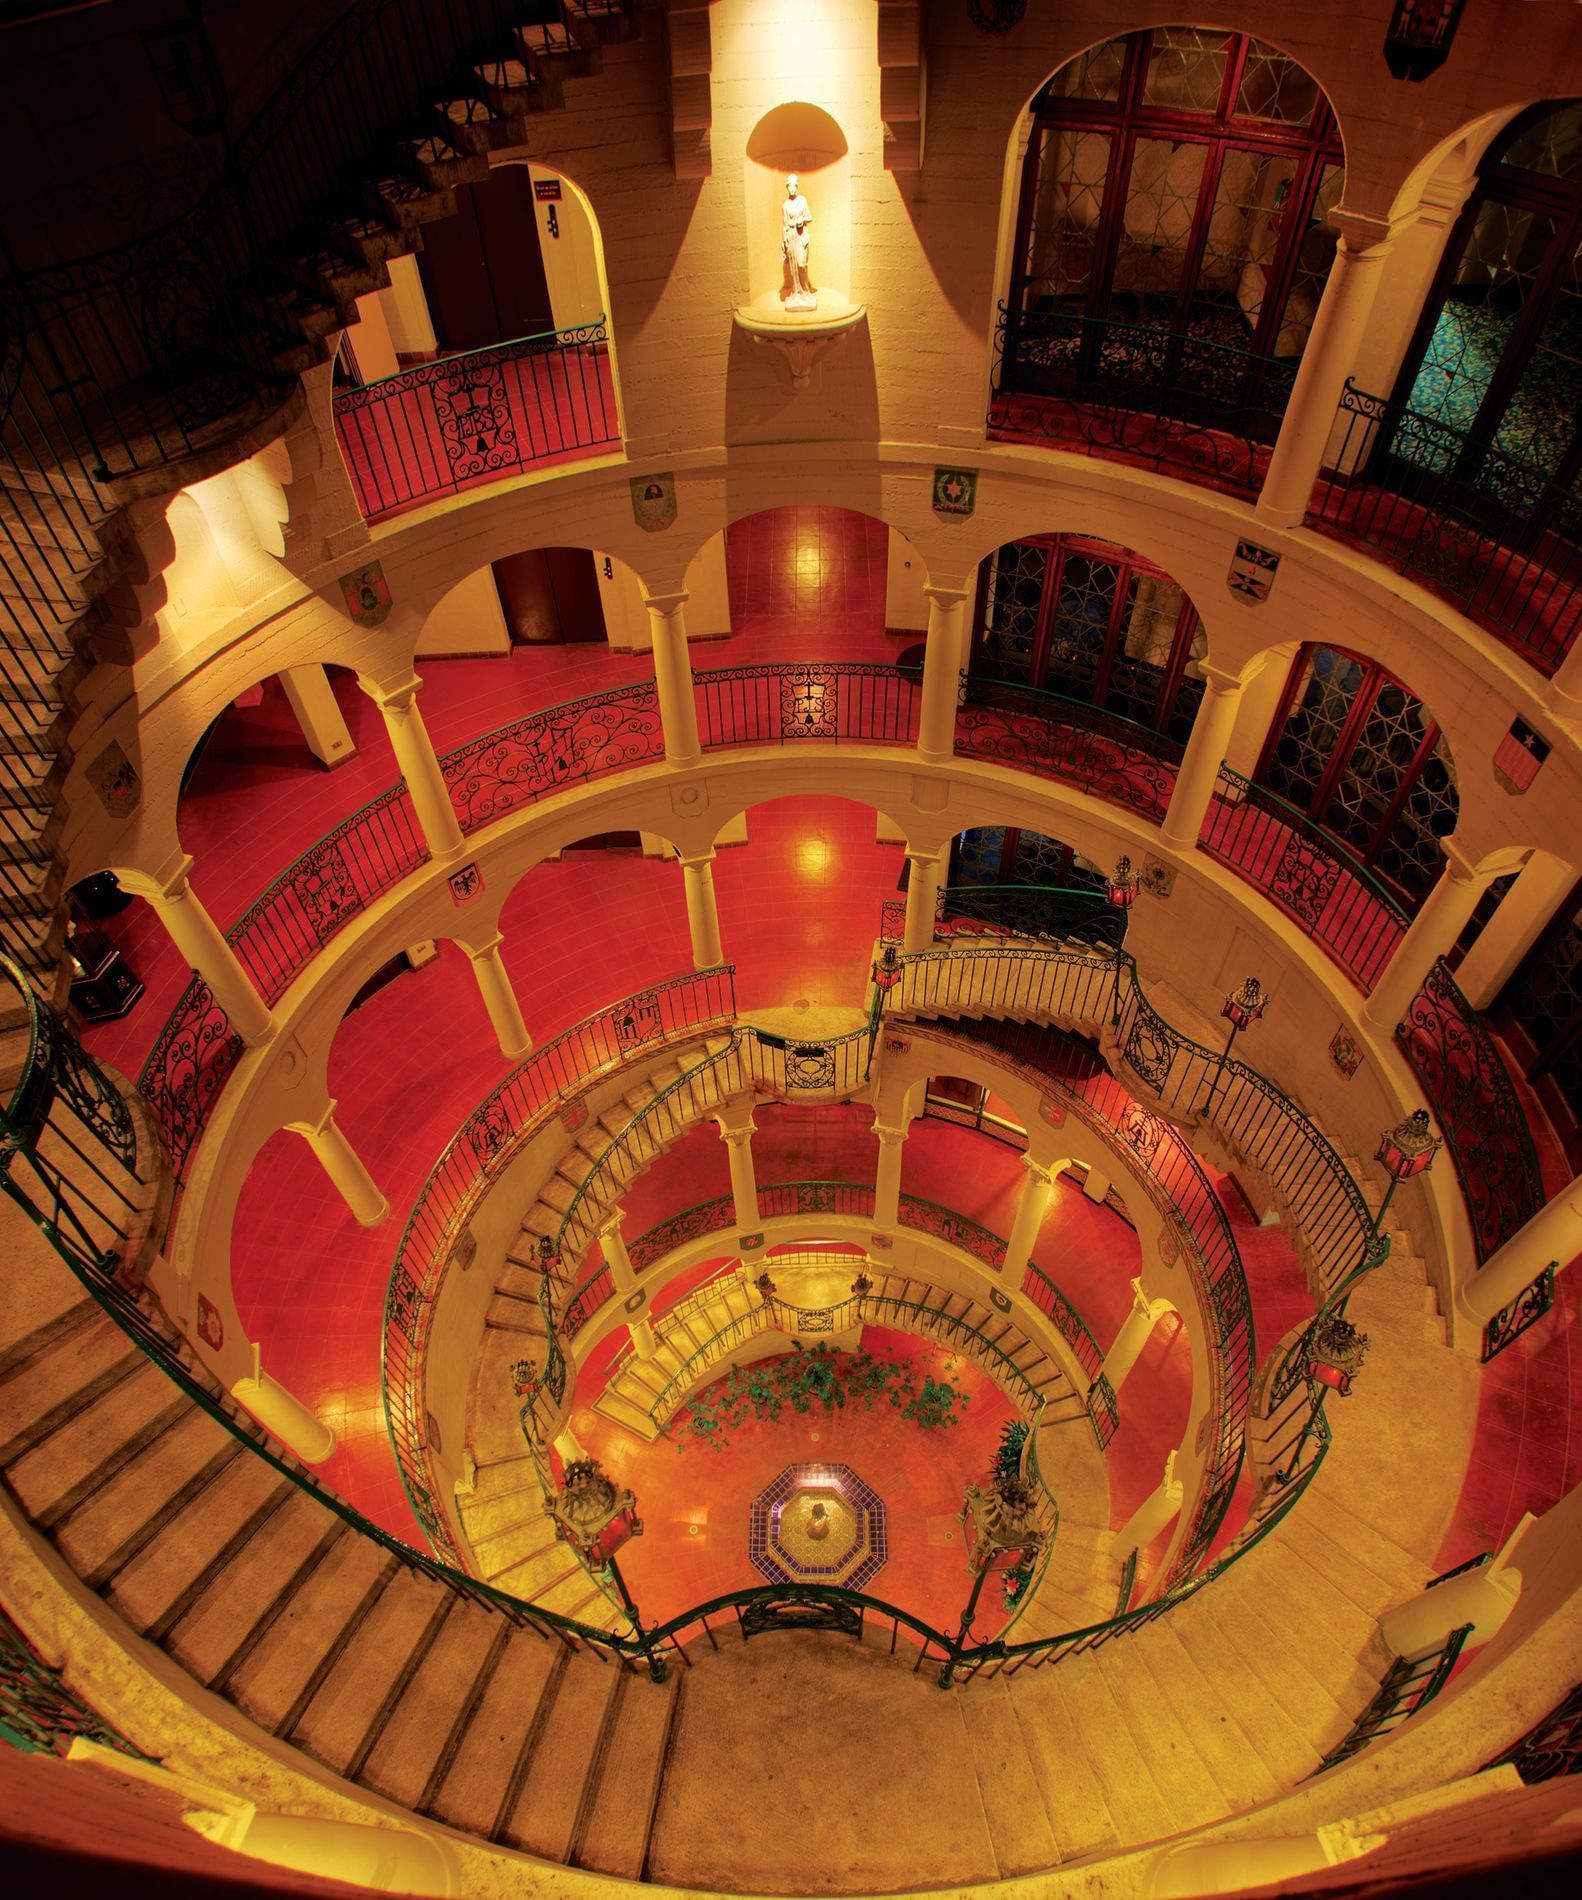 Interior of Tundra spiral staircase at Mission Inn Riverside